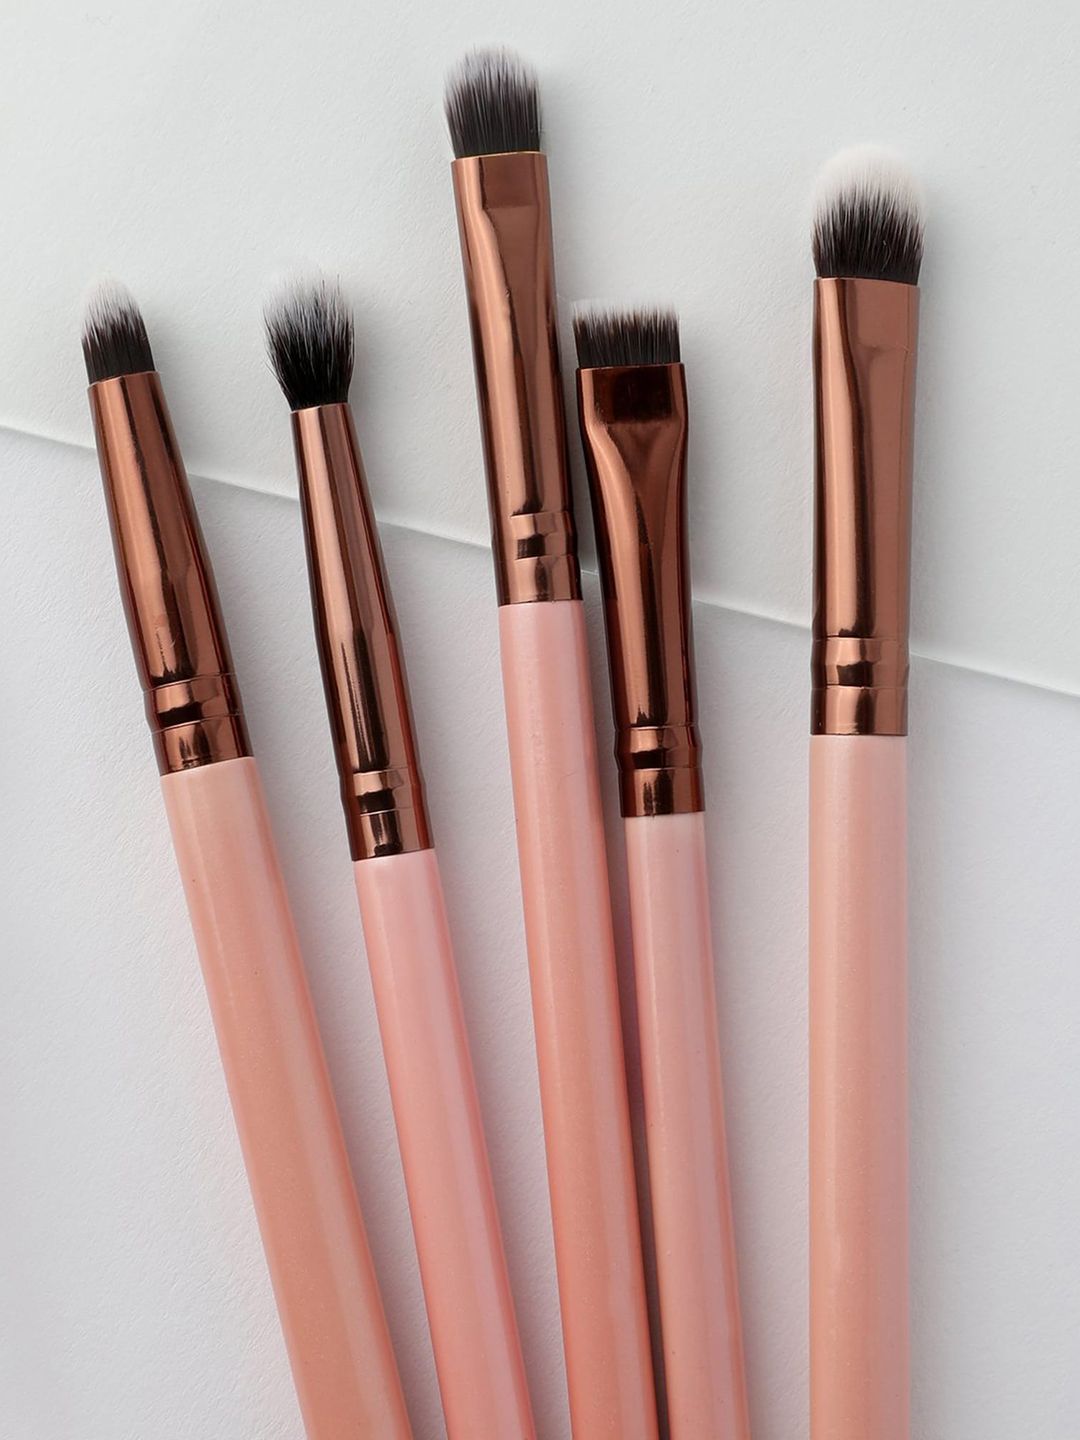 LUXIE Set of 5 Rose Gold Eyeconic Eye Makeup Brushes Price in India